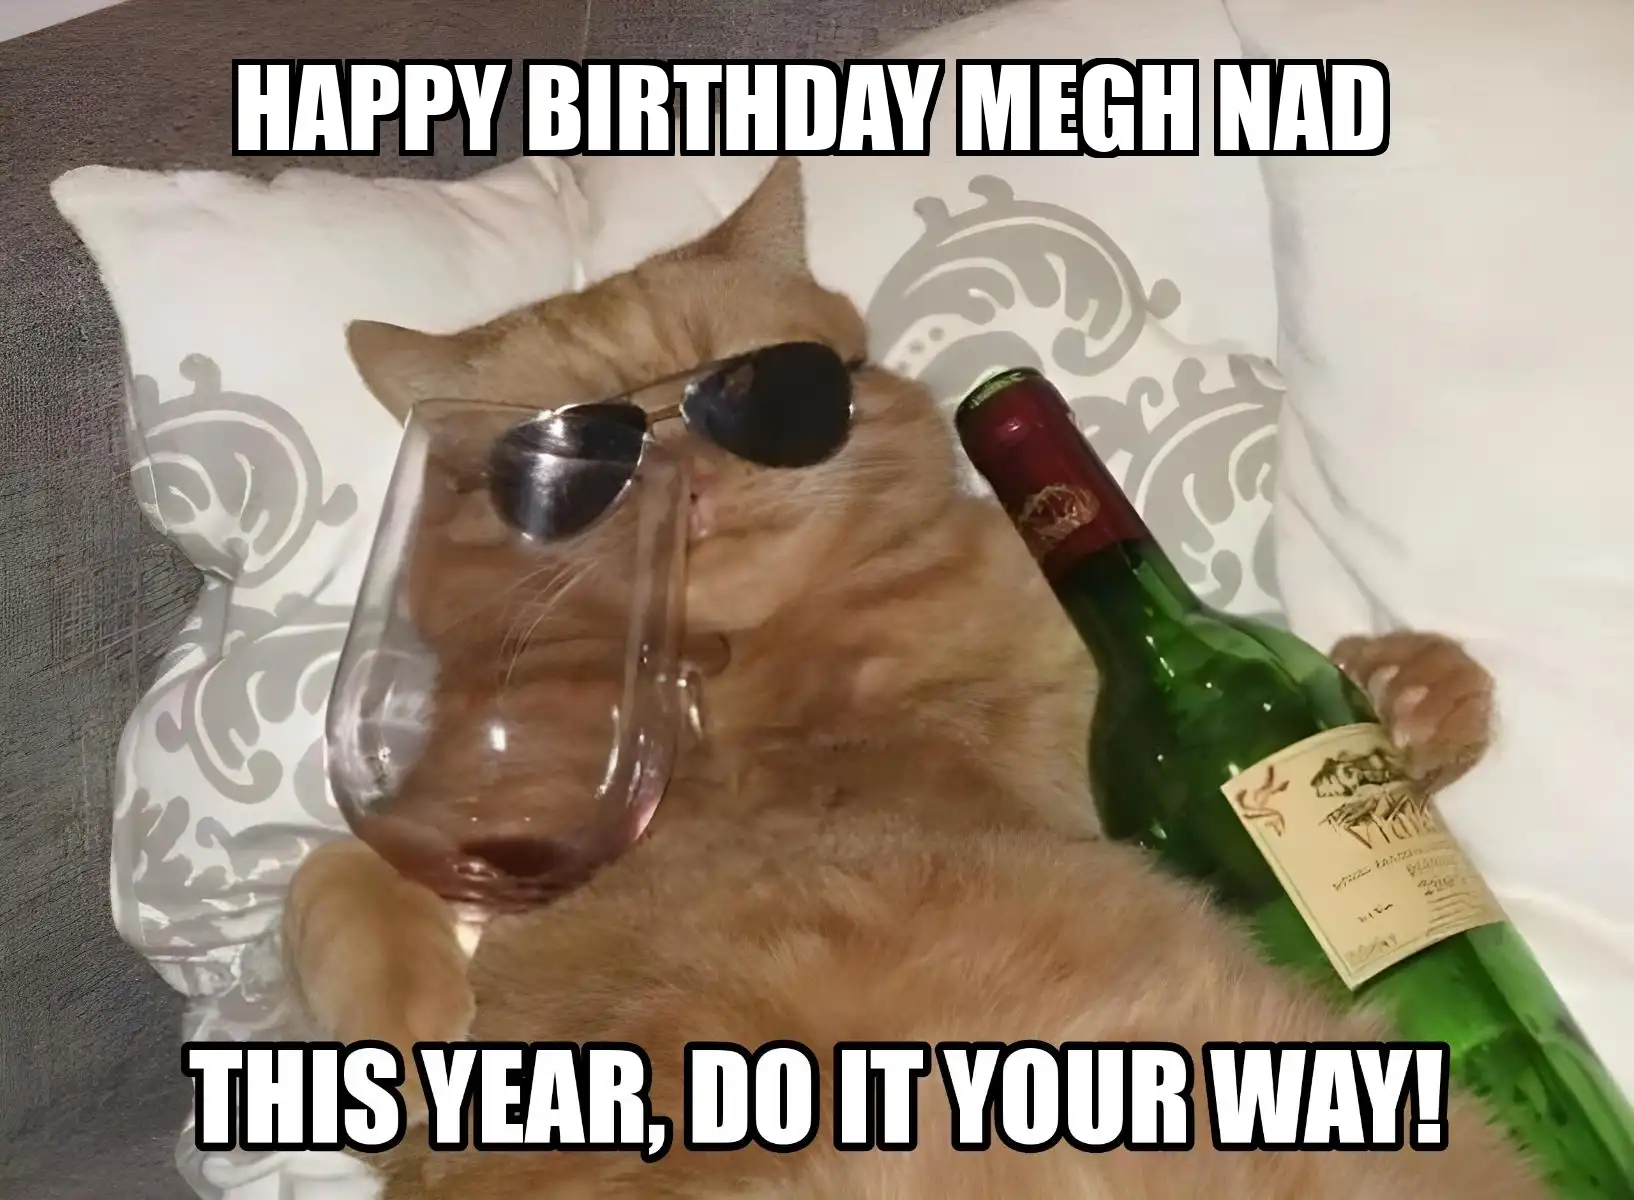 Happy Birthday Megh Nad This Year Do It Your Way Meme